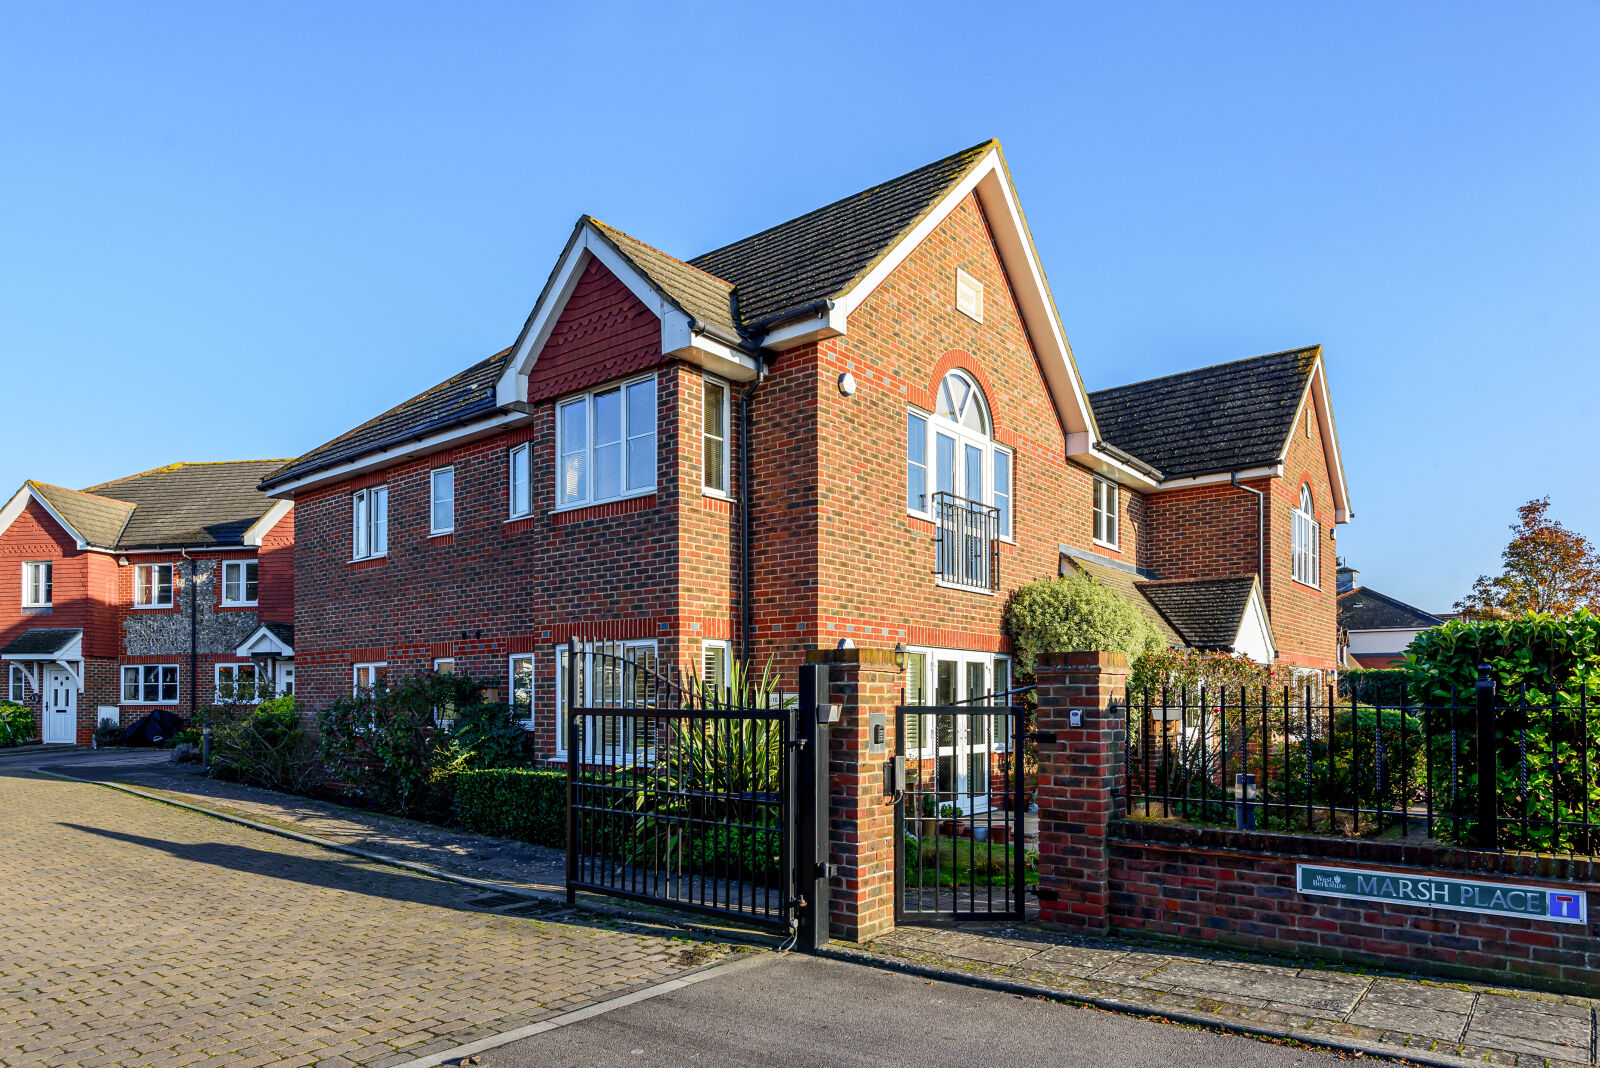 2 bedroom  flat for sale Marsh Place, Pangbourne, RG8, main image